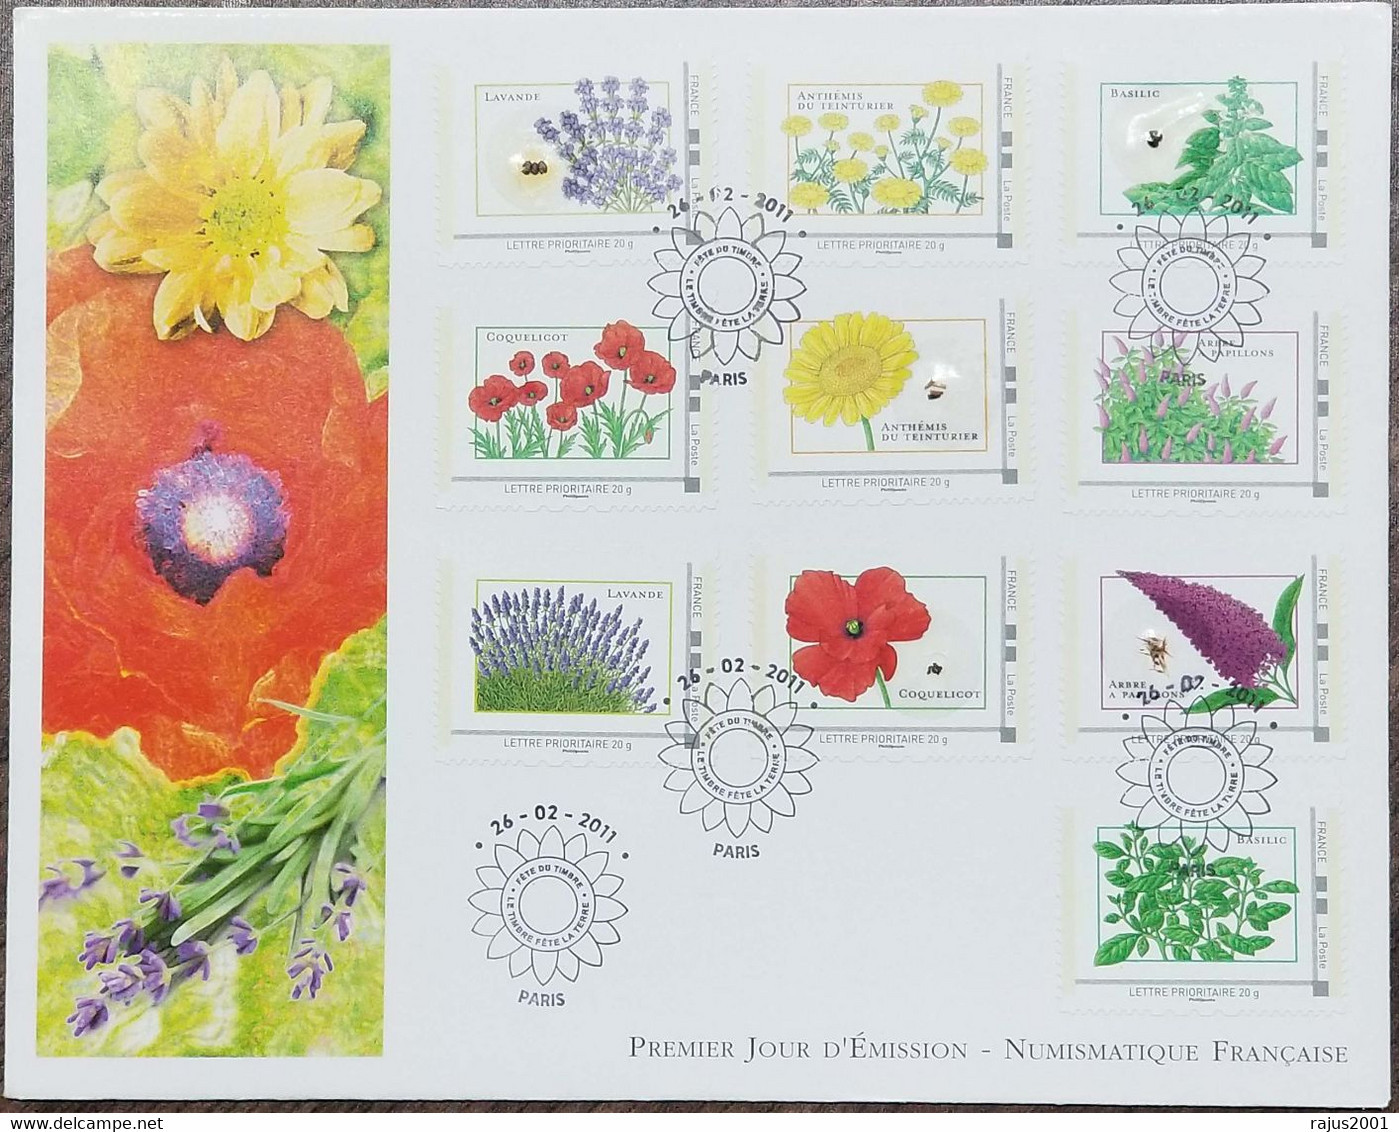 Seeds Of France, Seeds Of Lavander, Anthemis, DIFFERENT REAL FLOWER SEEDS AFFIXED ON Stamp UNUSUAL FDC 2011 - Fouten Op Zegels